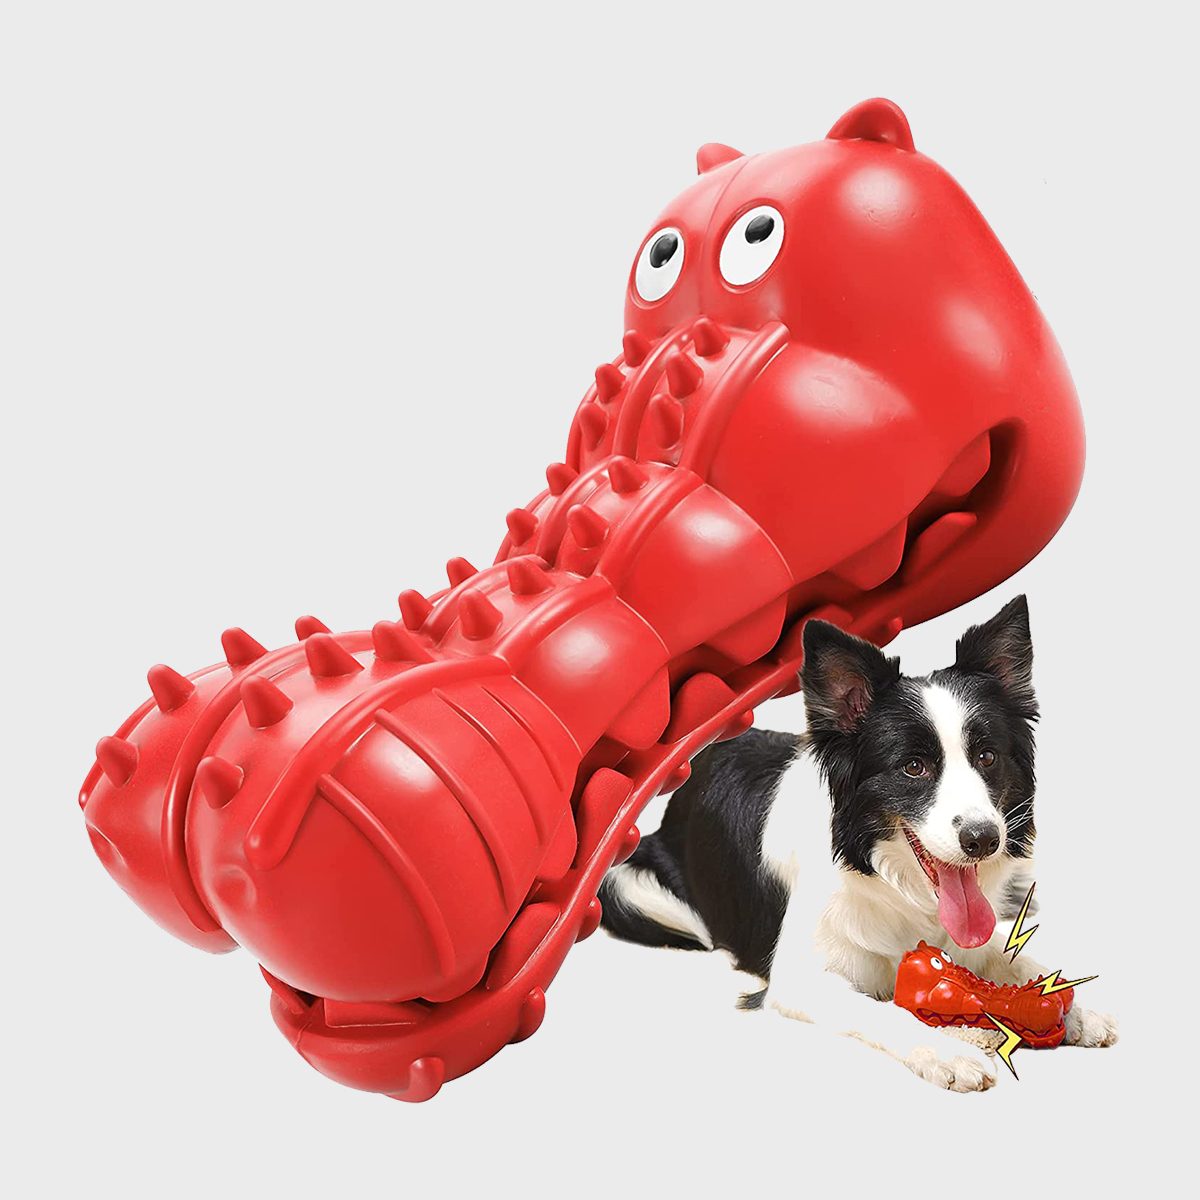 https://www.rd.com/wp-content/uploads/2020/05/Rmolitty-Squeaky-Dog-Toy.jpg?fit=700%2C700